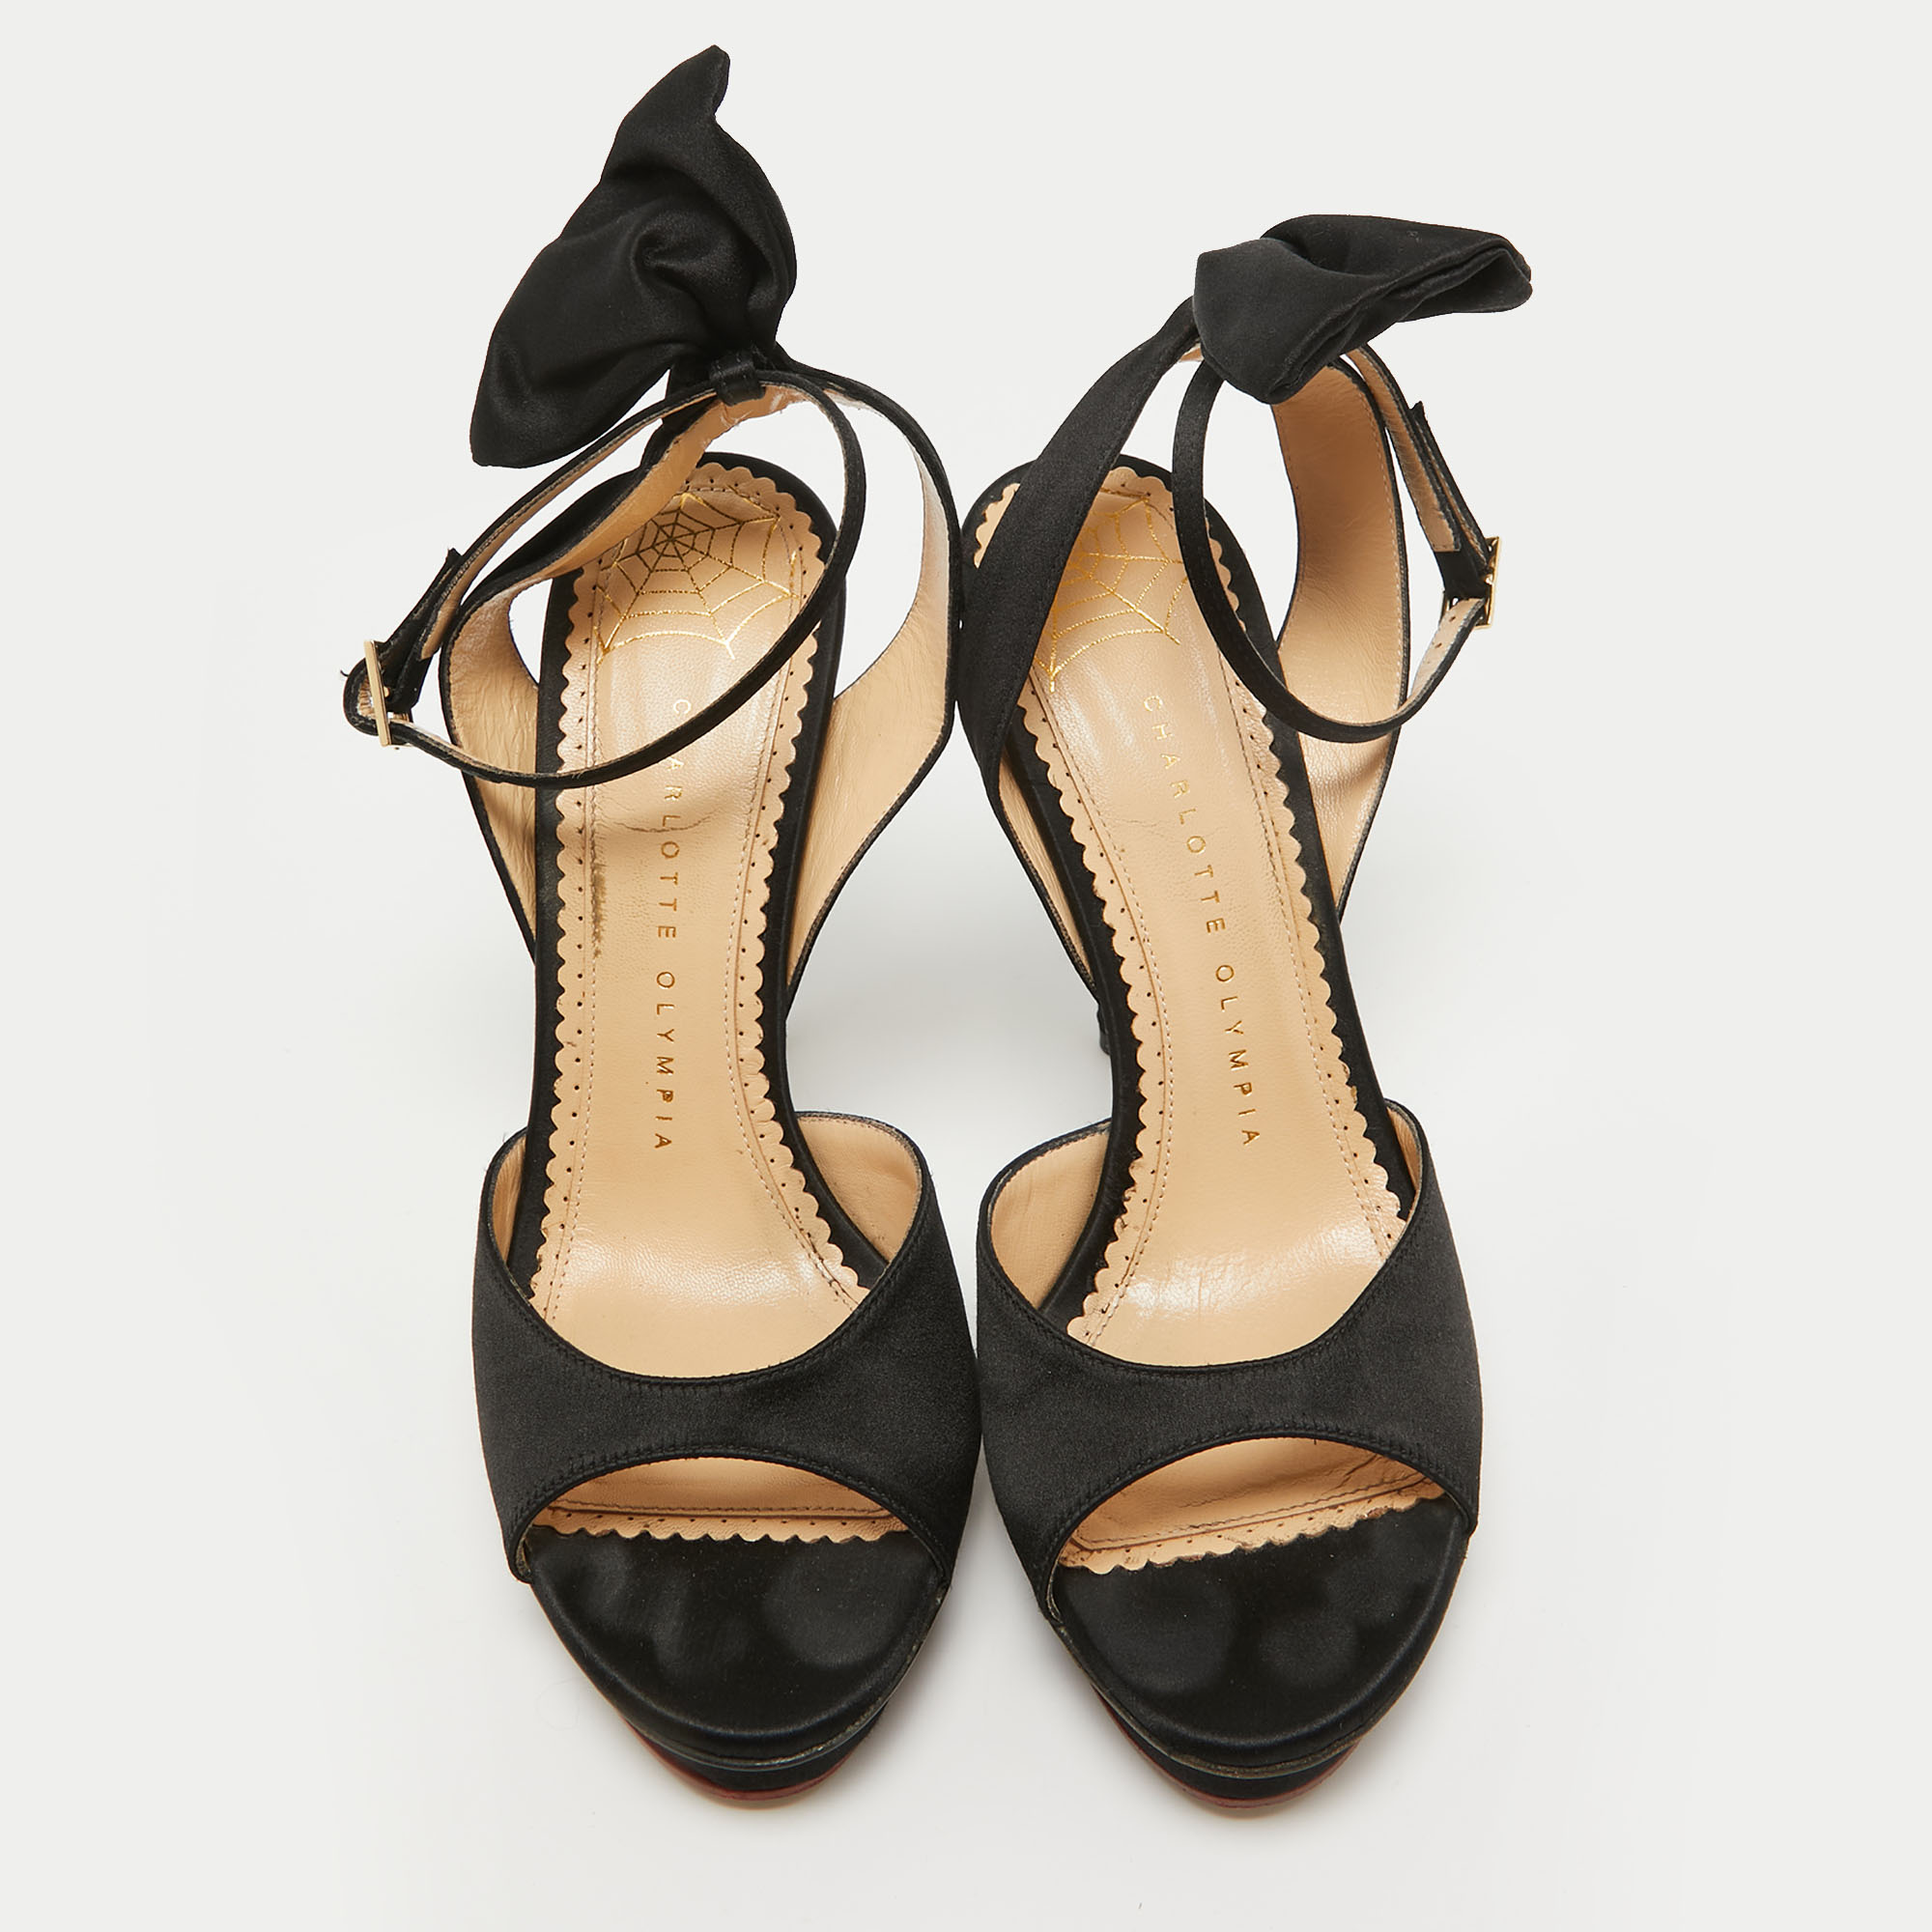 Charlotte Olympia Black Satin Wallace Sandals Size 38